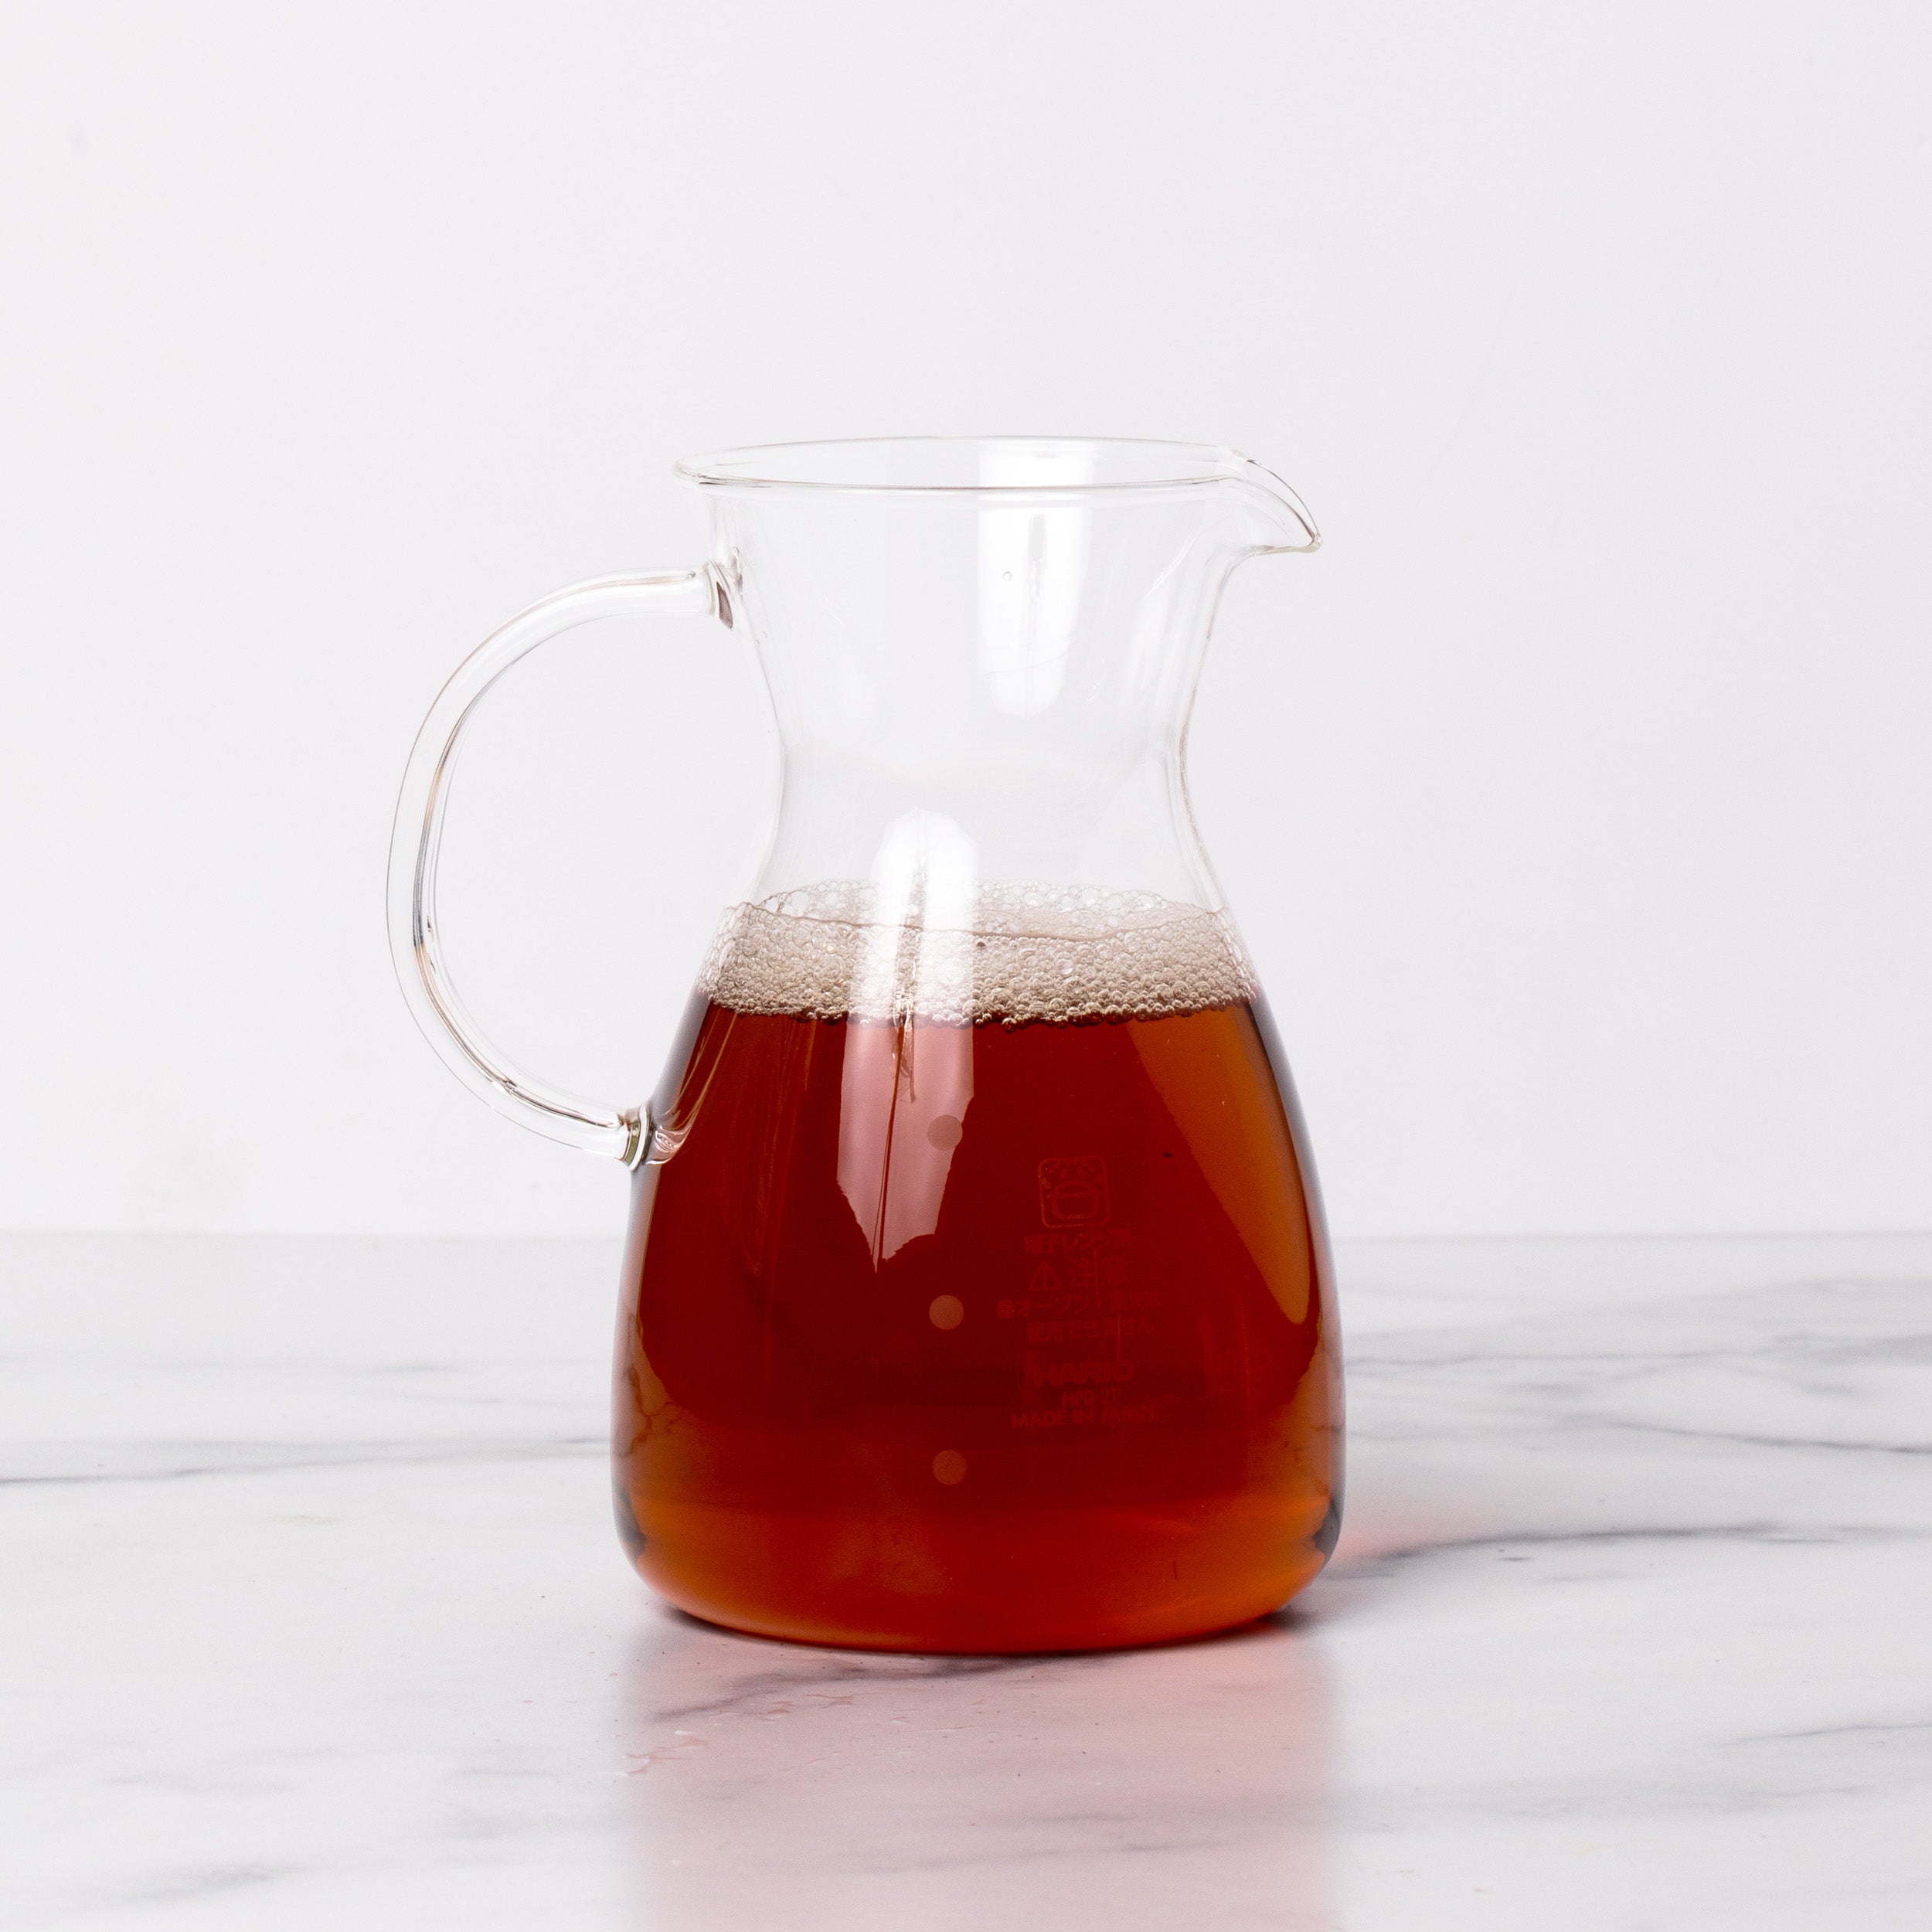 Glass decanter filled with amber tea liquid on a marble background.